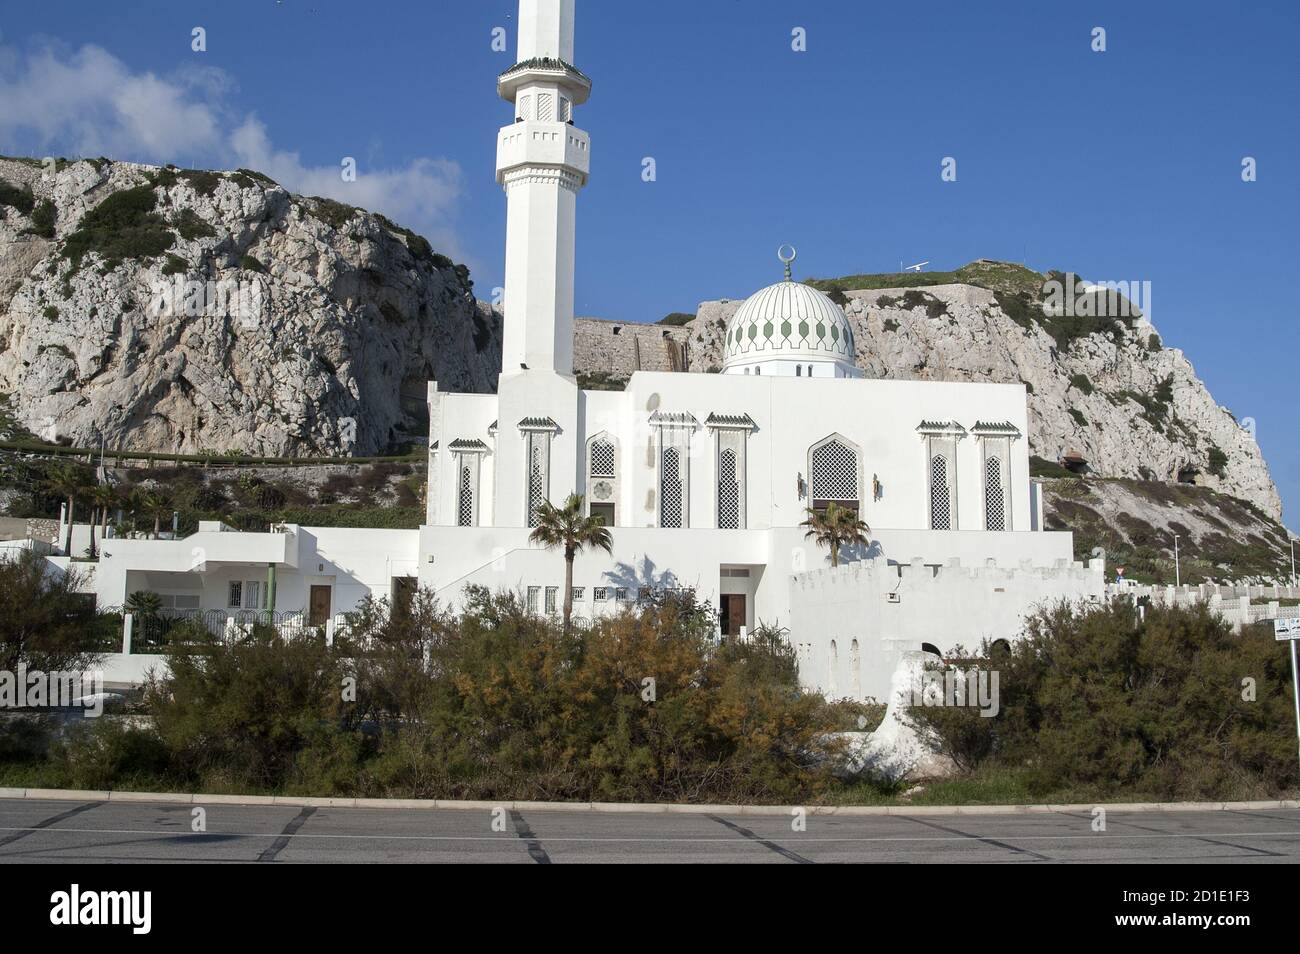 Gibraltar; Ibrahim-al-Ibrahim Mosque; Mosque of the Custodian of the Two Holy Mosques; Stock Photo